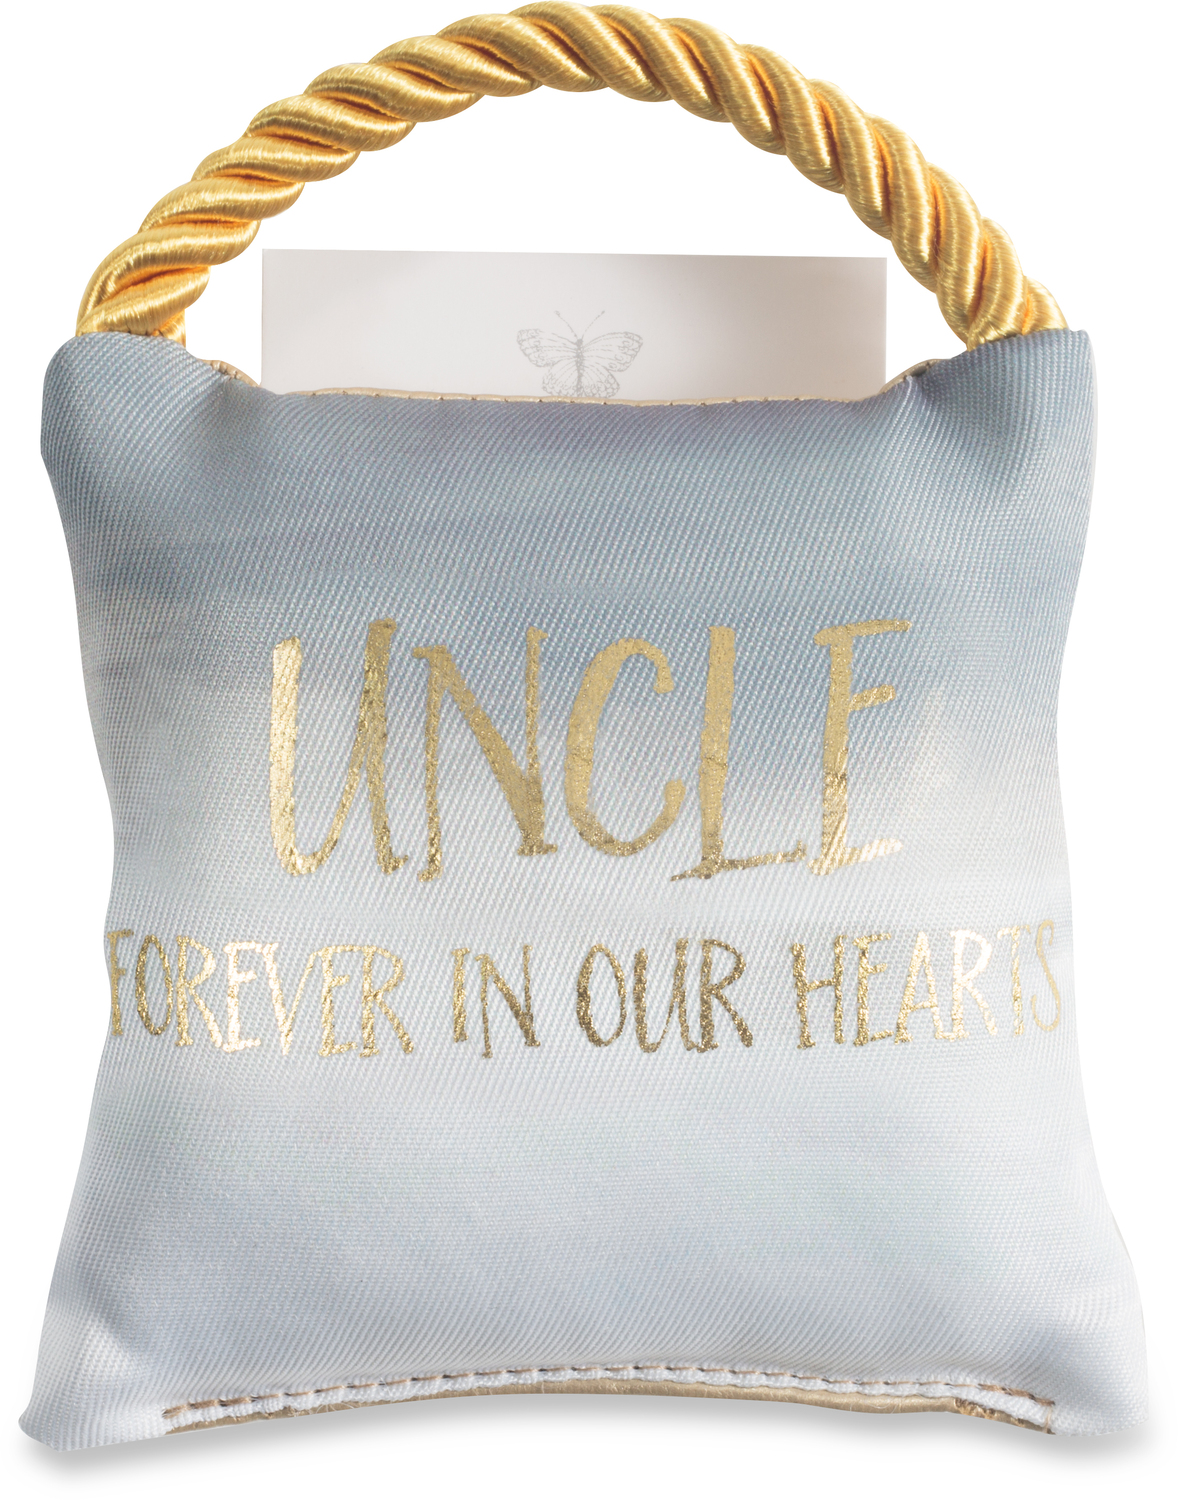 Uncle by Butterfly Whispers - Uncle - 4.5" Memorial Pocket Pillow